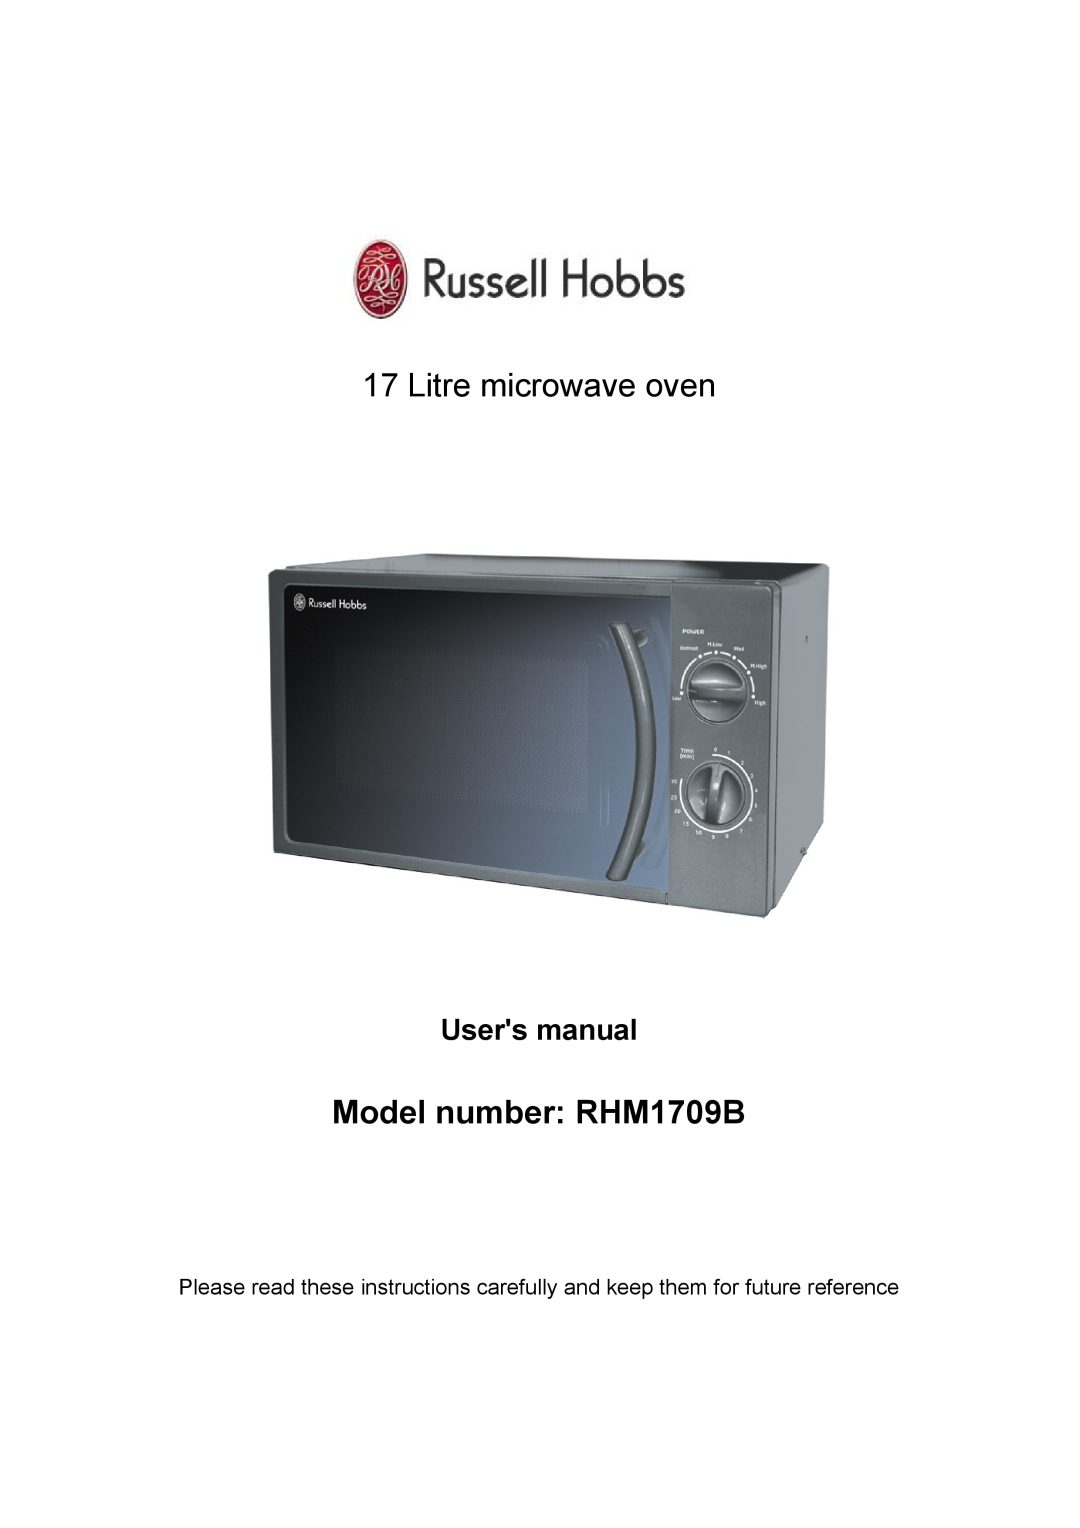 Russell Hobbs user manual Users manual, Litre microwave oven, Model number RHM1709B 